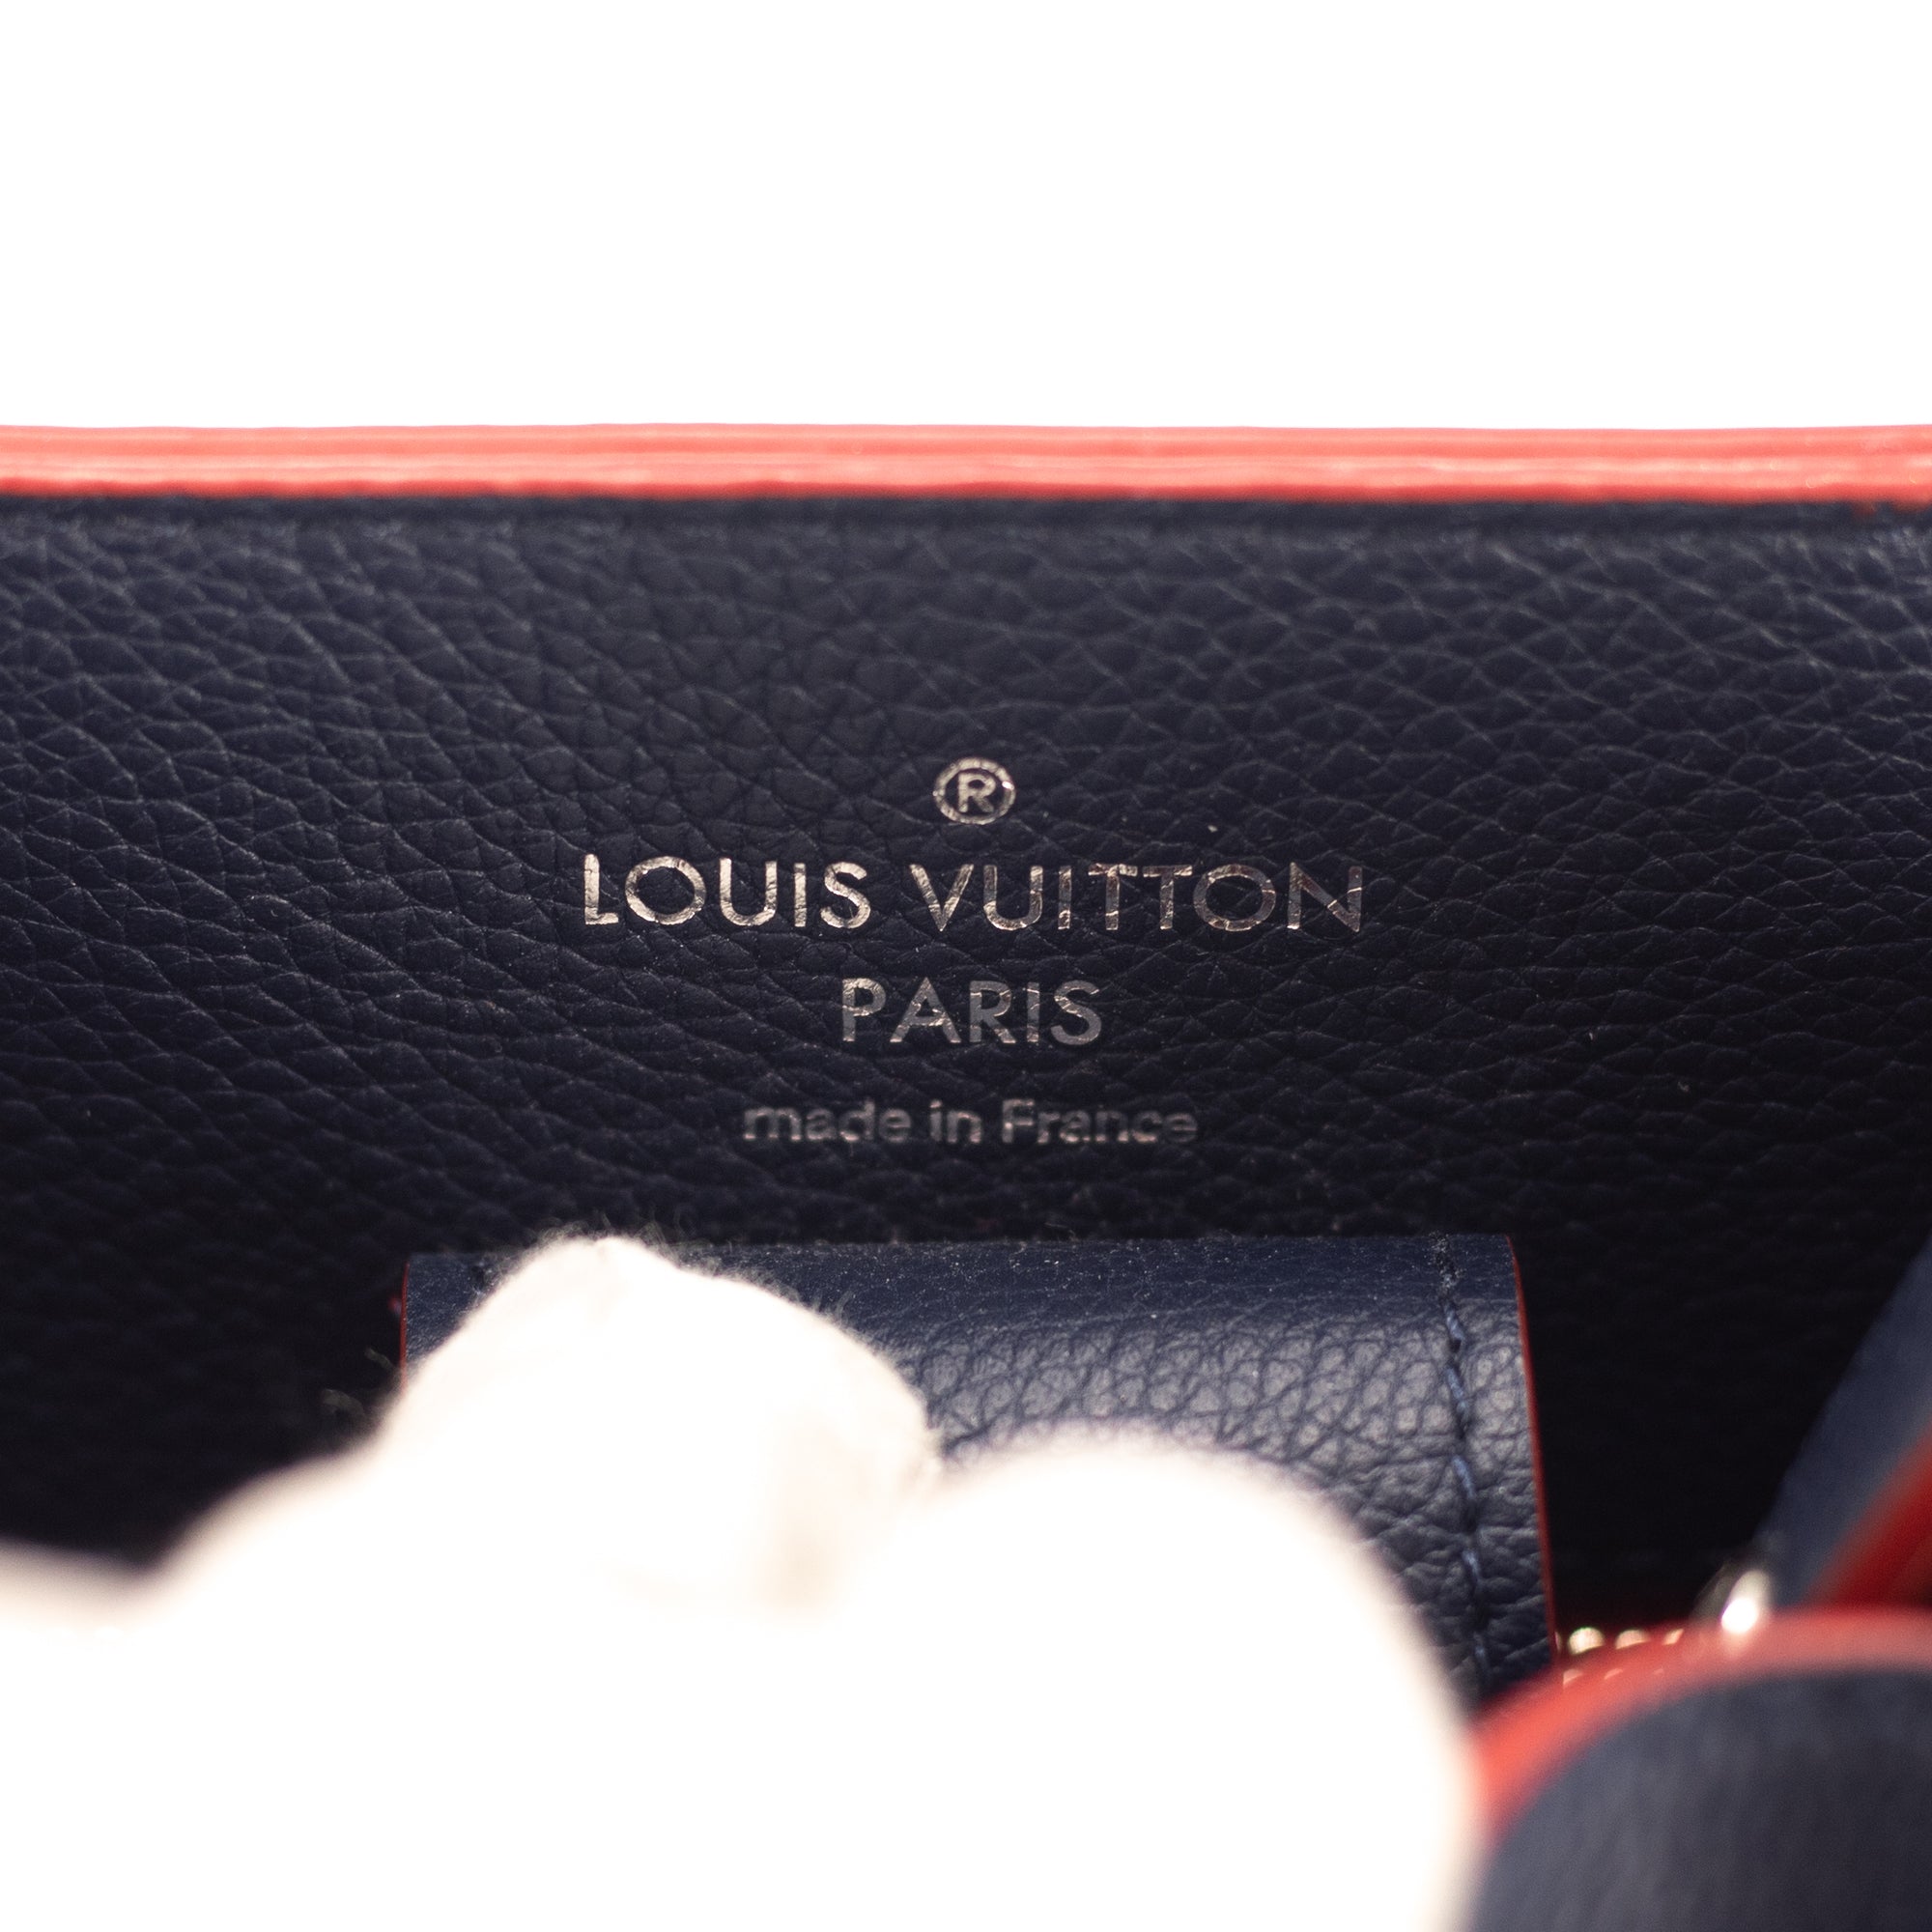 Authenticated Used LOUIS VUITTON Louis Vuitton Lock Me Cover Tote Bag  M54682 Grain Calf Leather Marine Rouge Silver Hardware Turn 